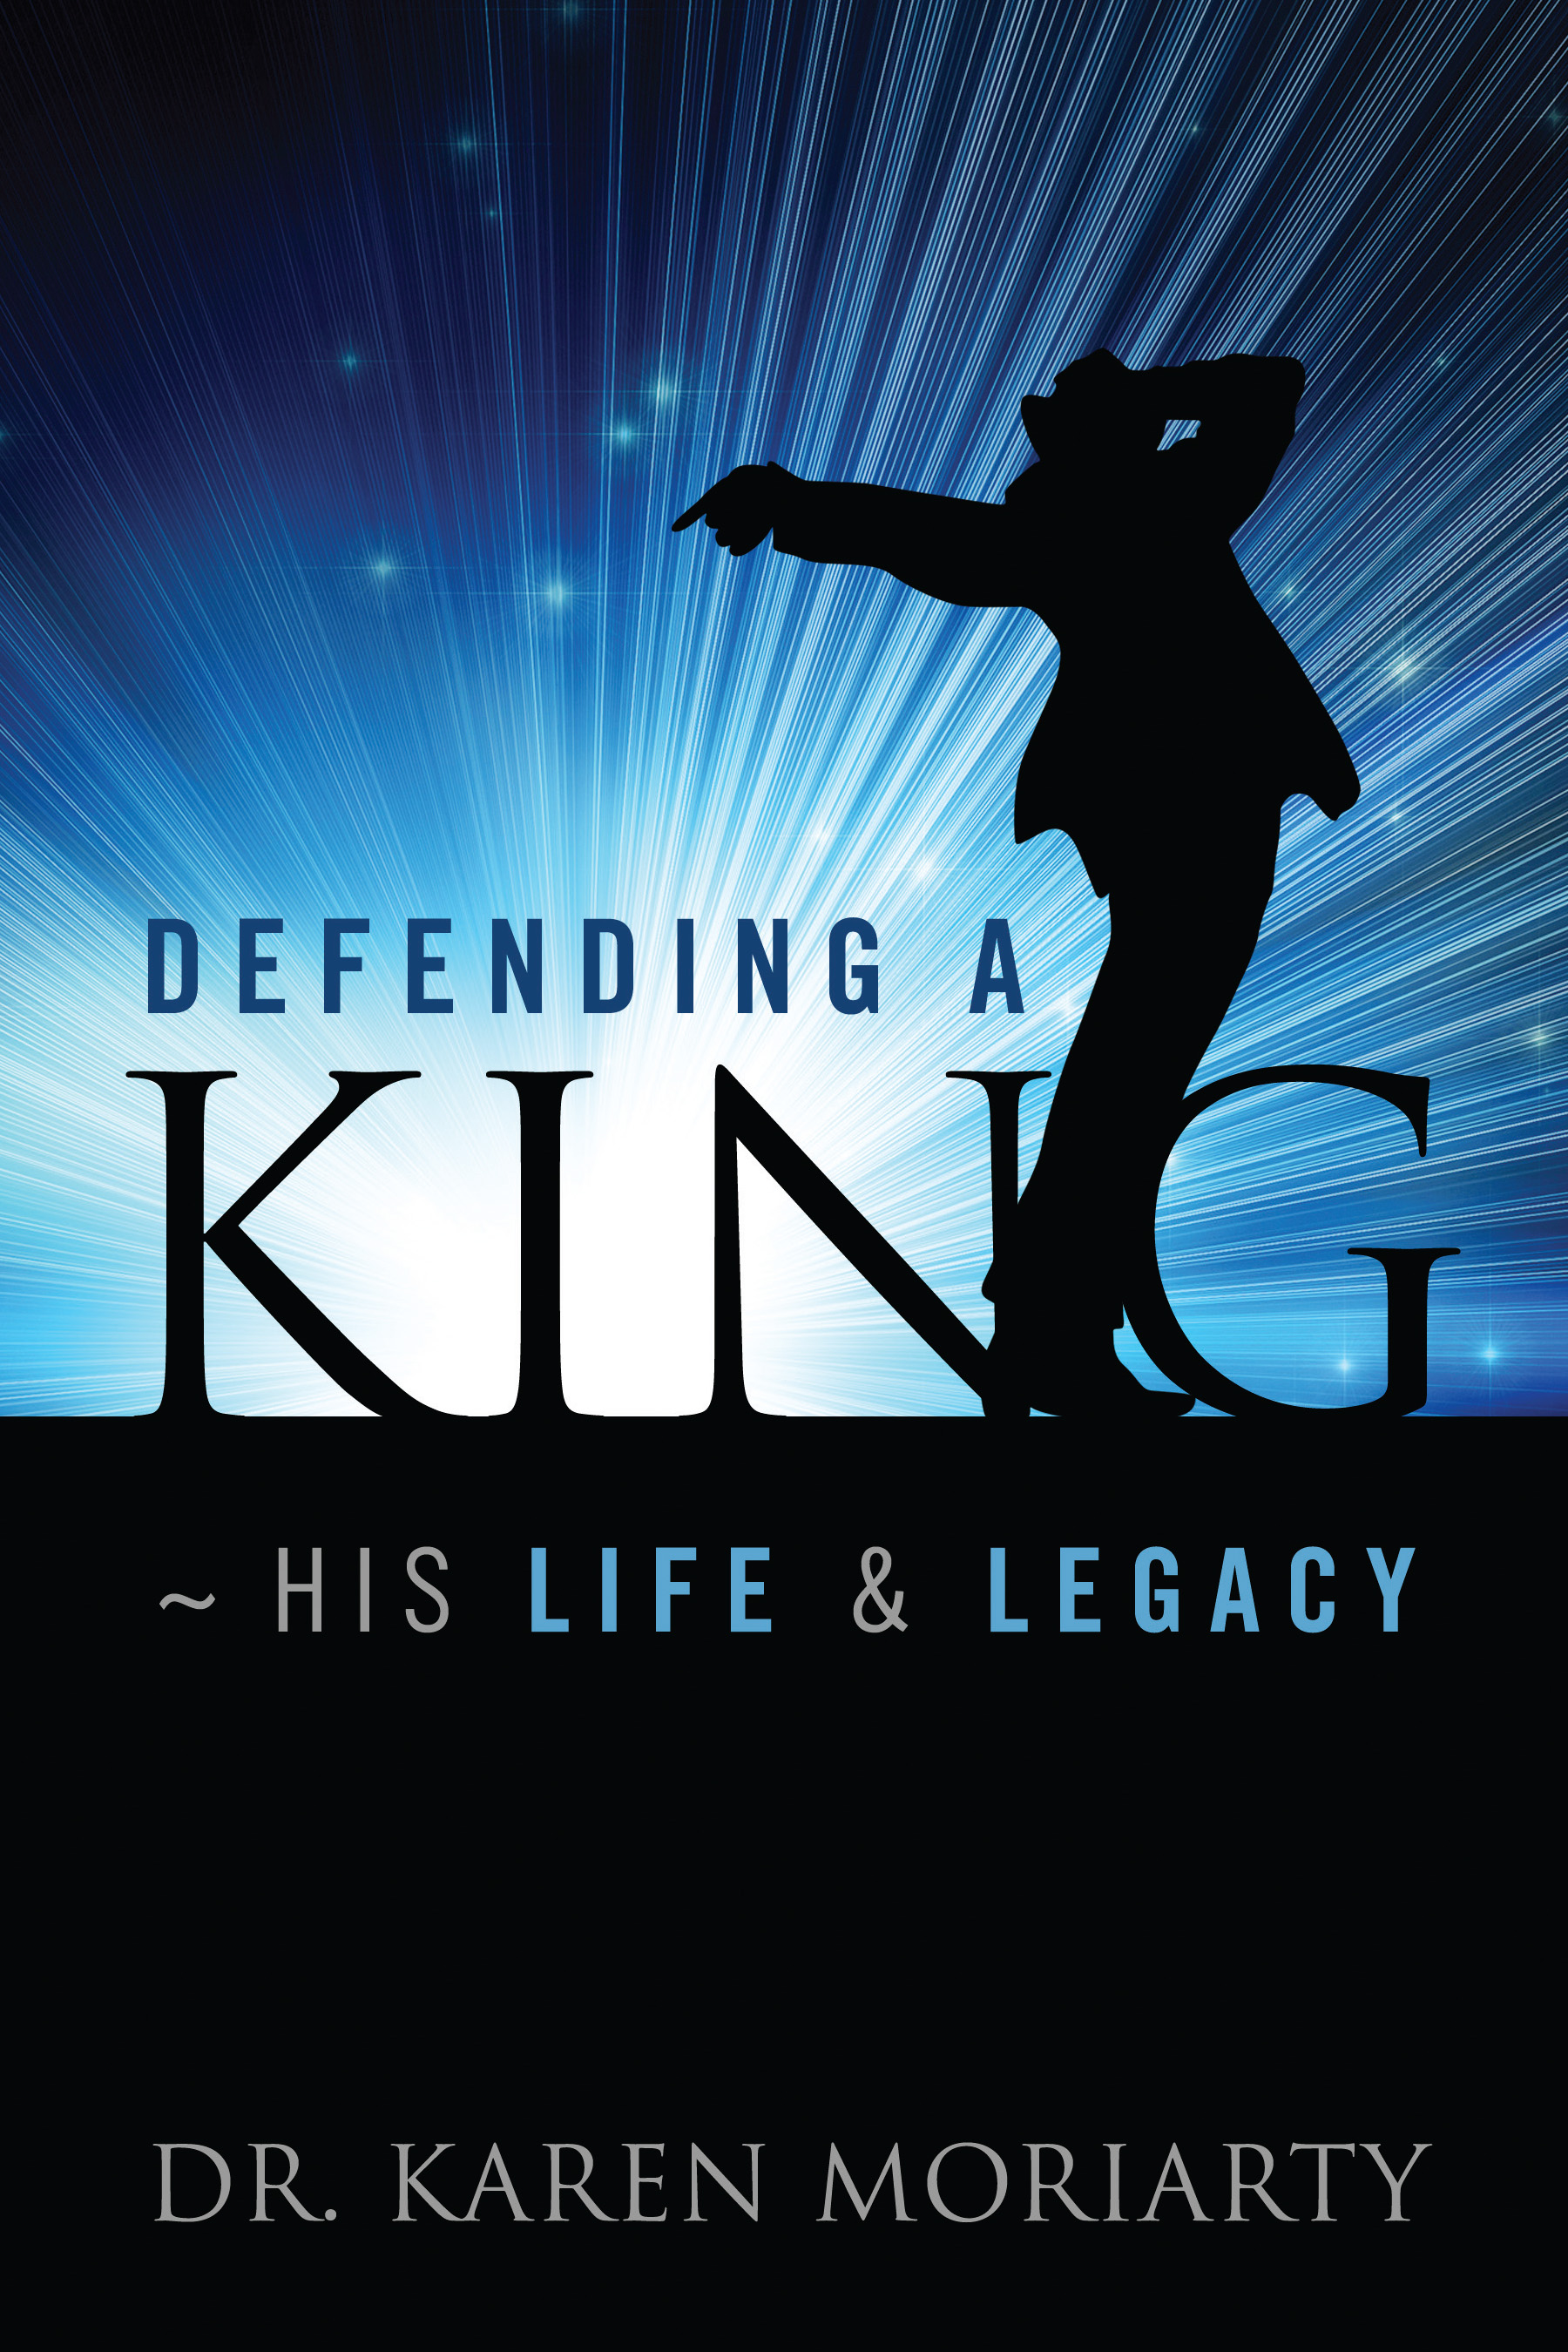 Self-published author Dr. Karen Moriarty’s book Defending A King - His Life & Legacy published by Outskirts Press